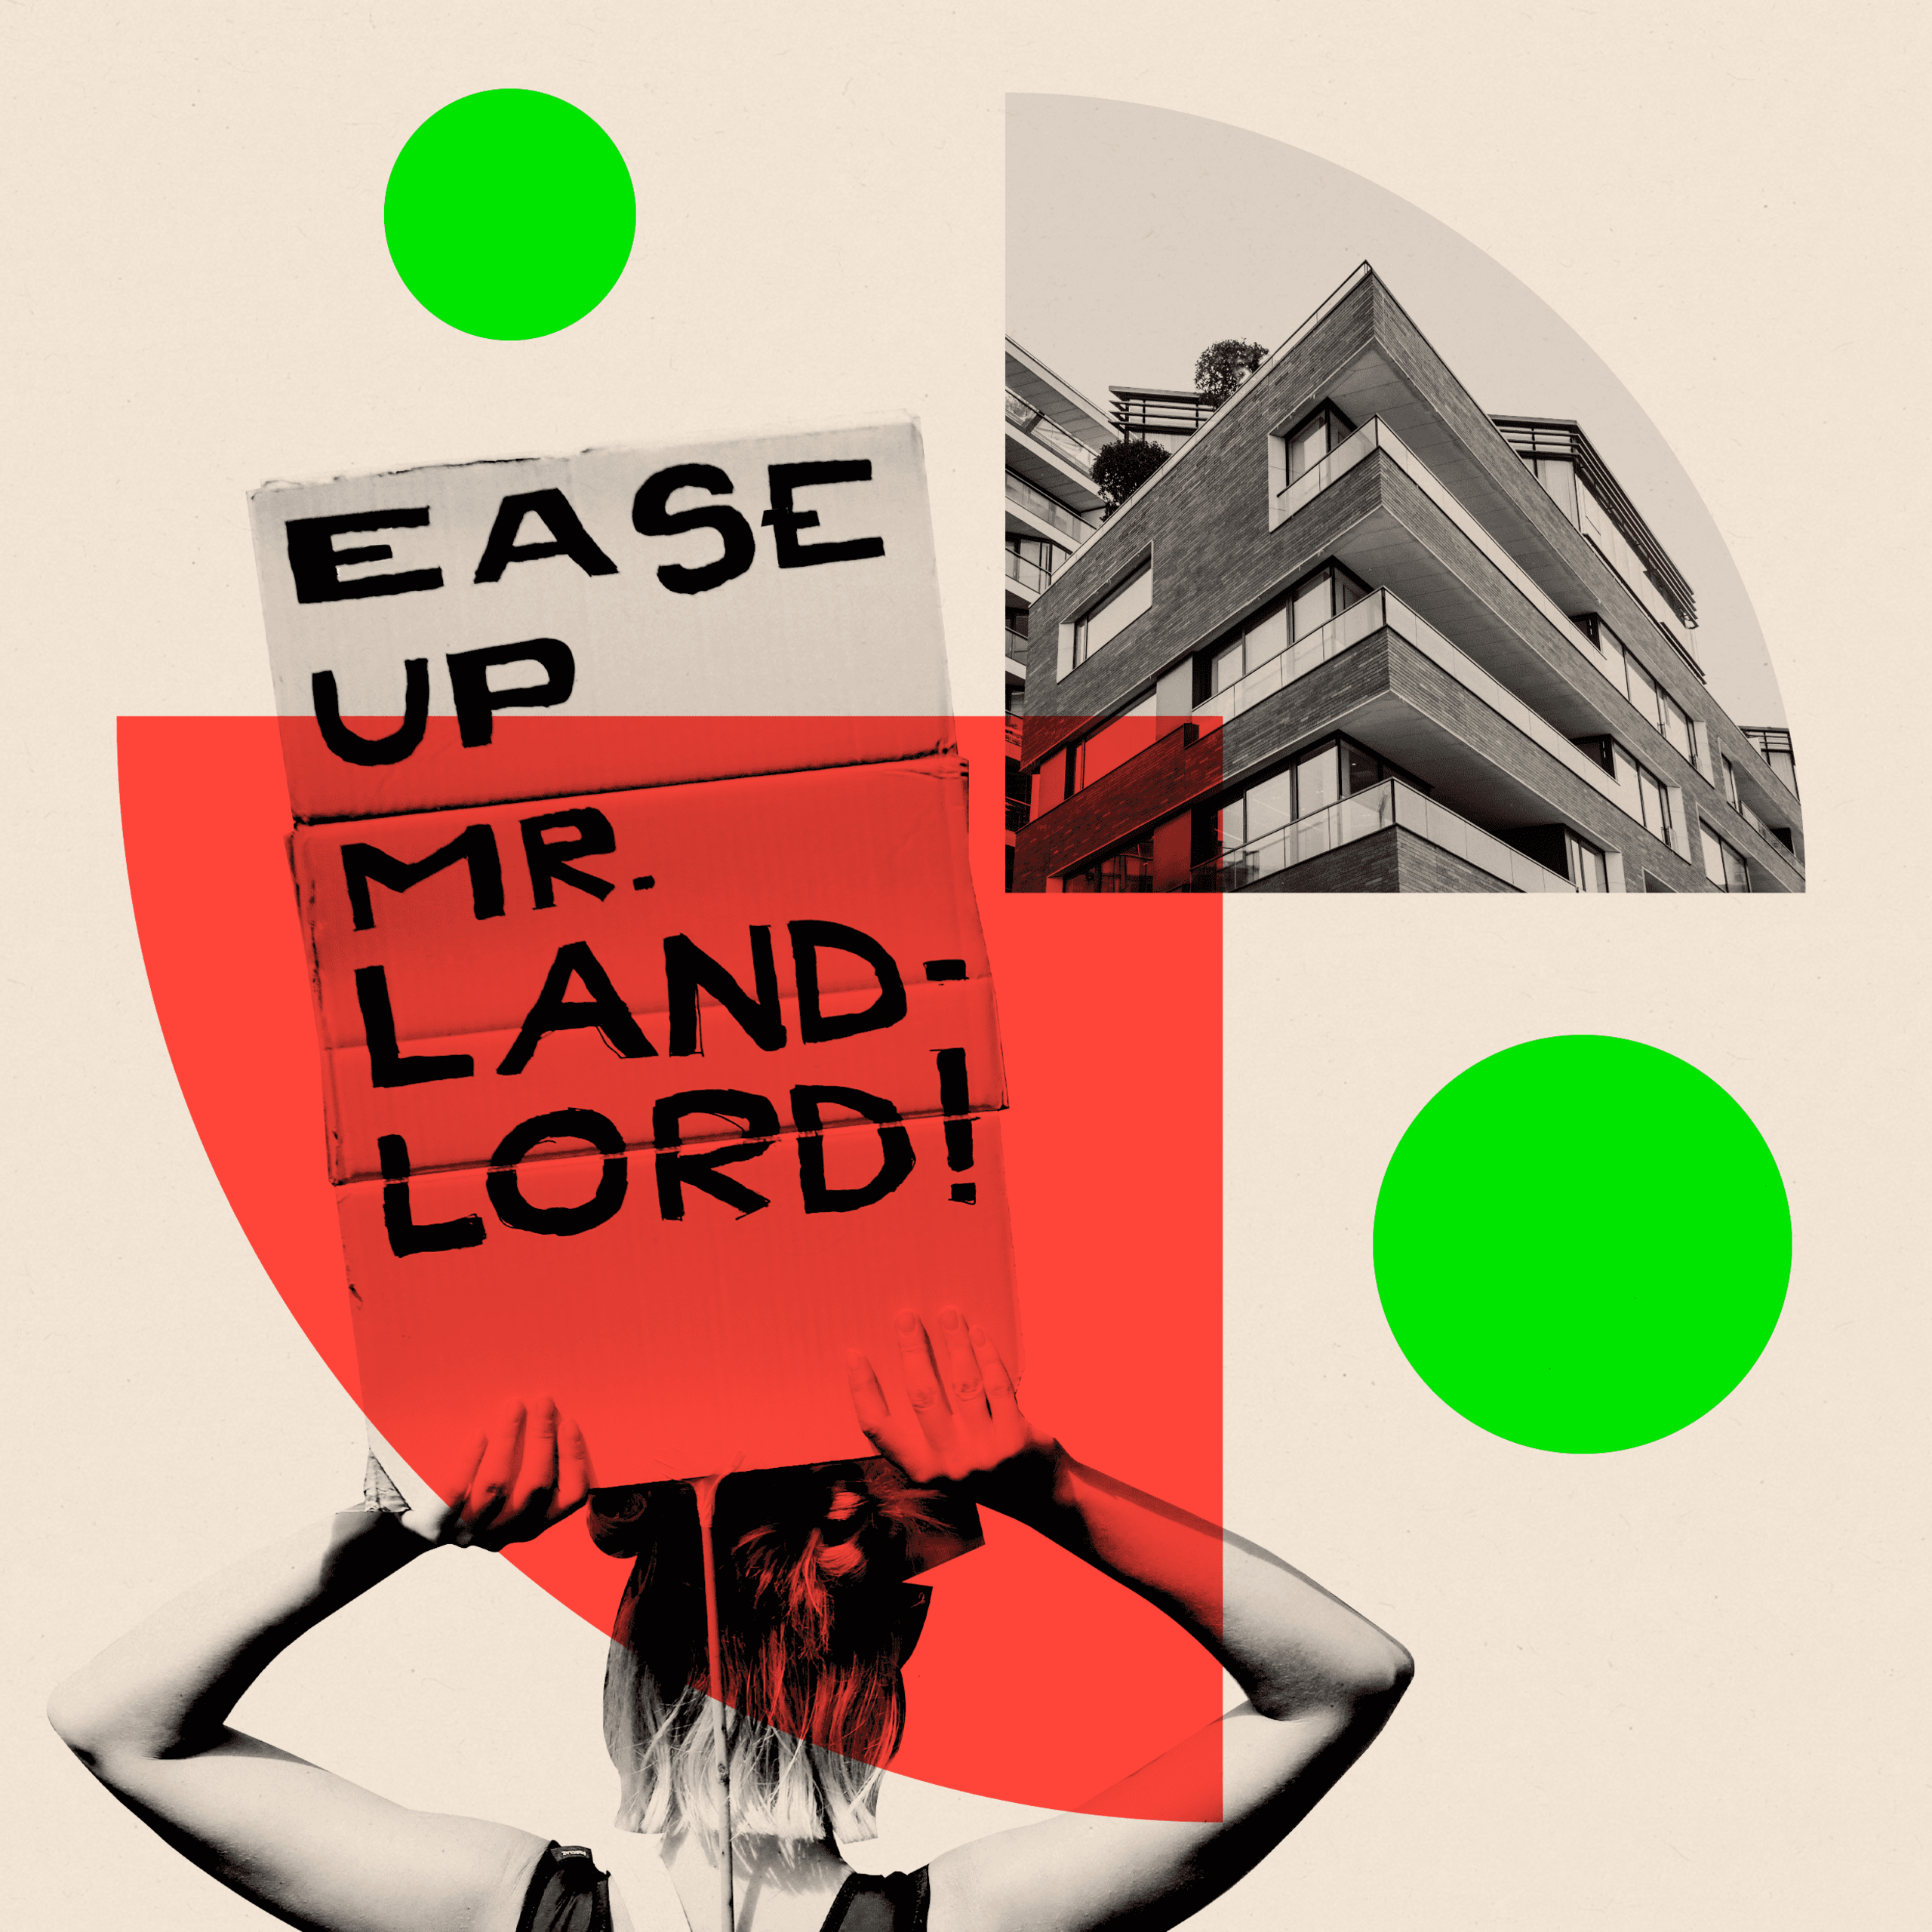 Montage showing a protest against rent rises with a demonstrator holding up a banner that reads "Ease up Mr. Land-lord!" alongside an image of a modern apartment block